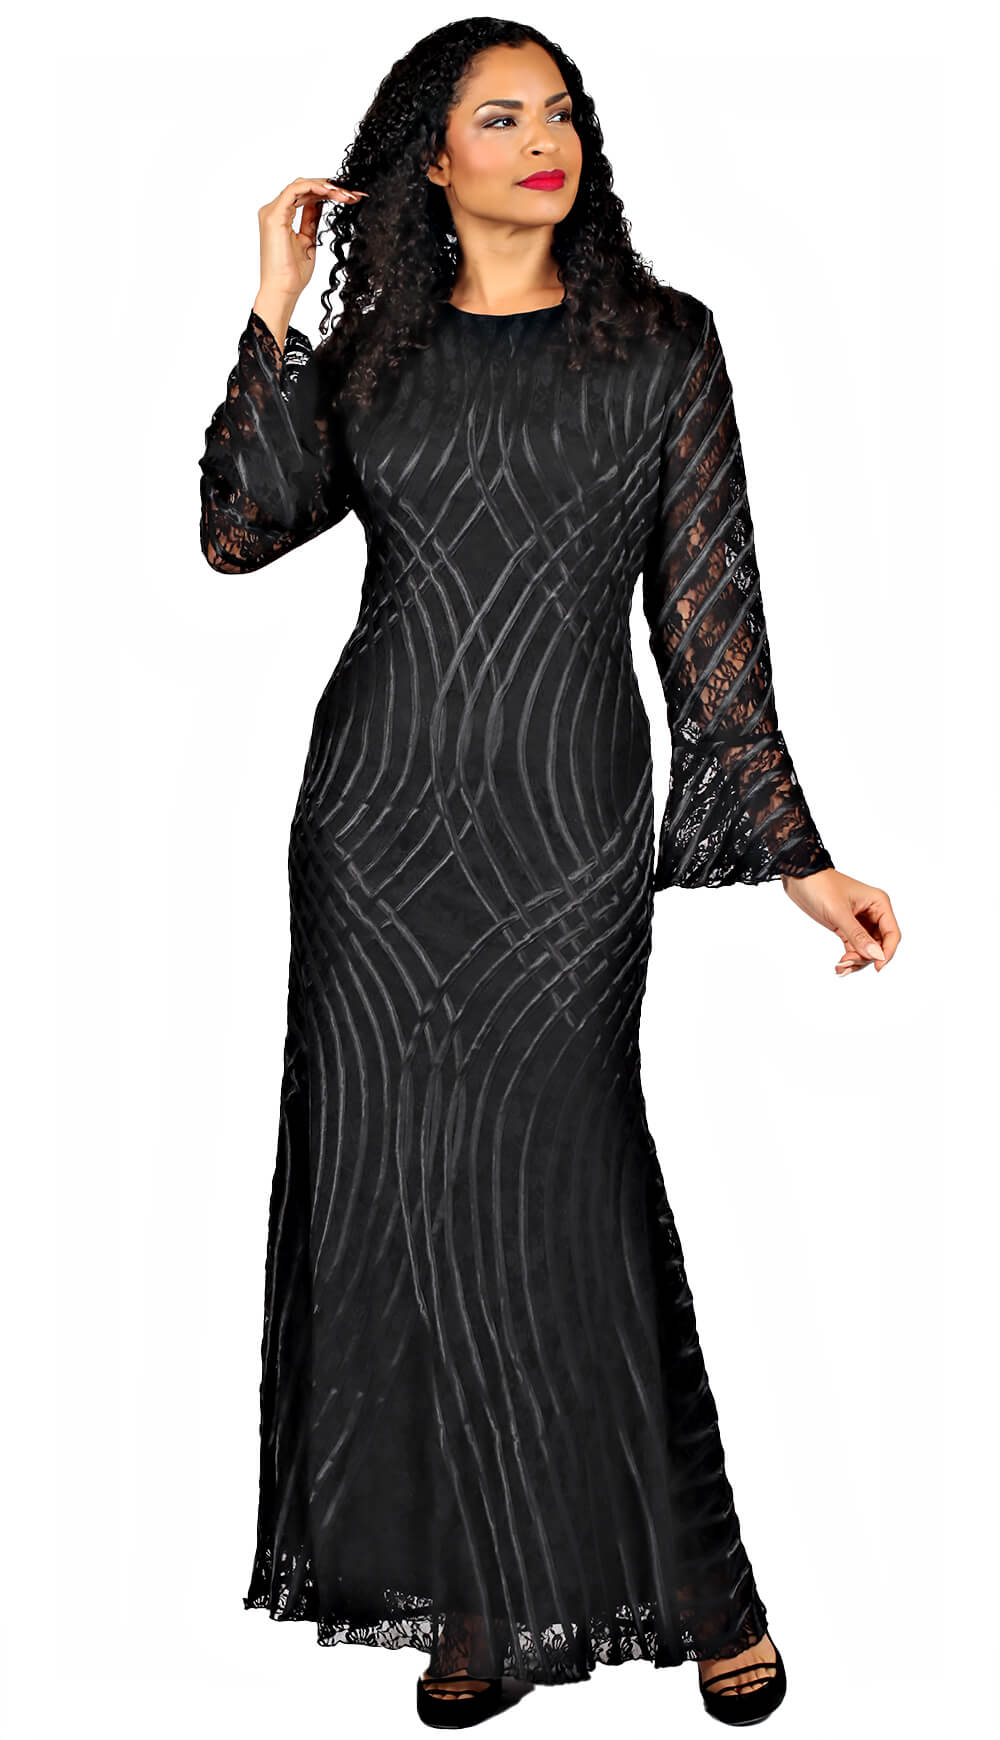 Diana Couture Dress 8737-Black - Church Suits For Less